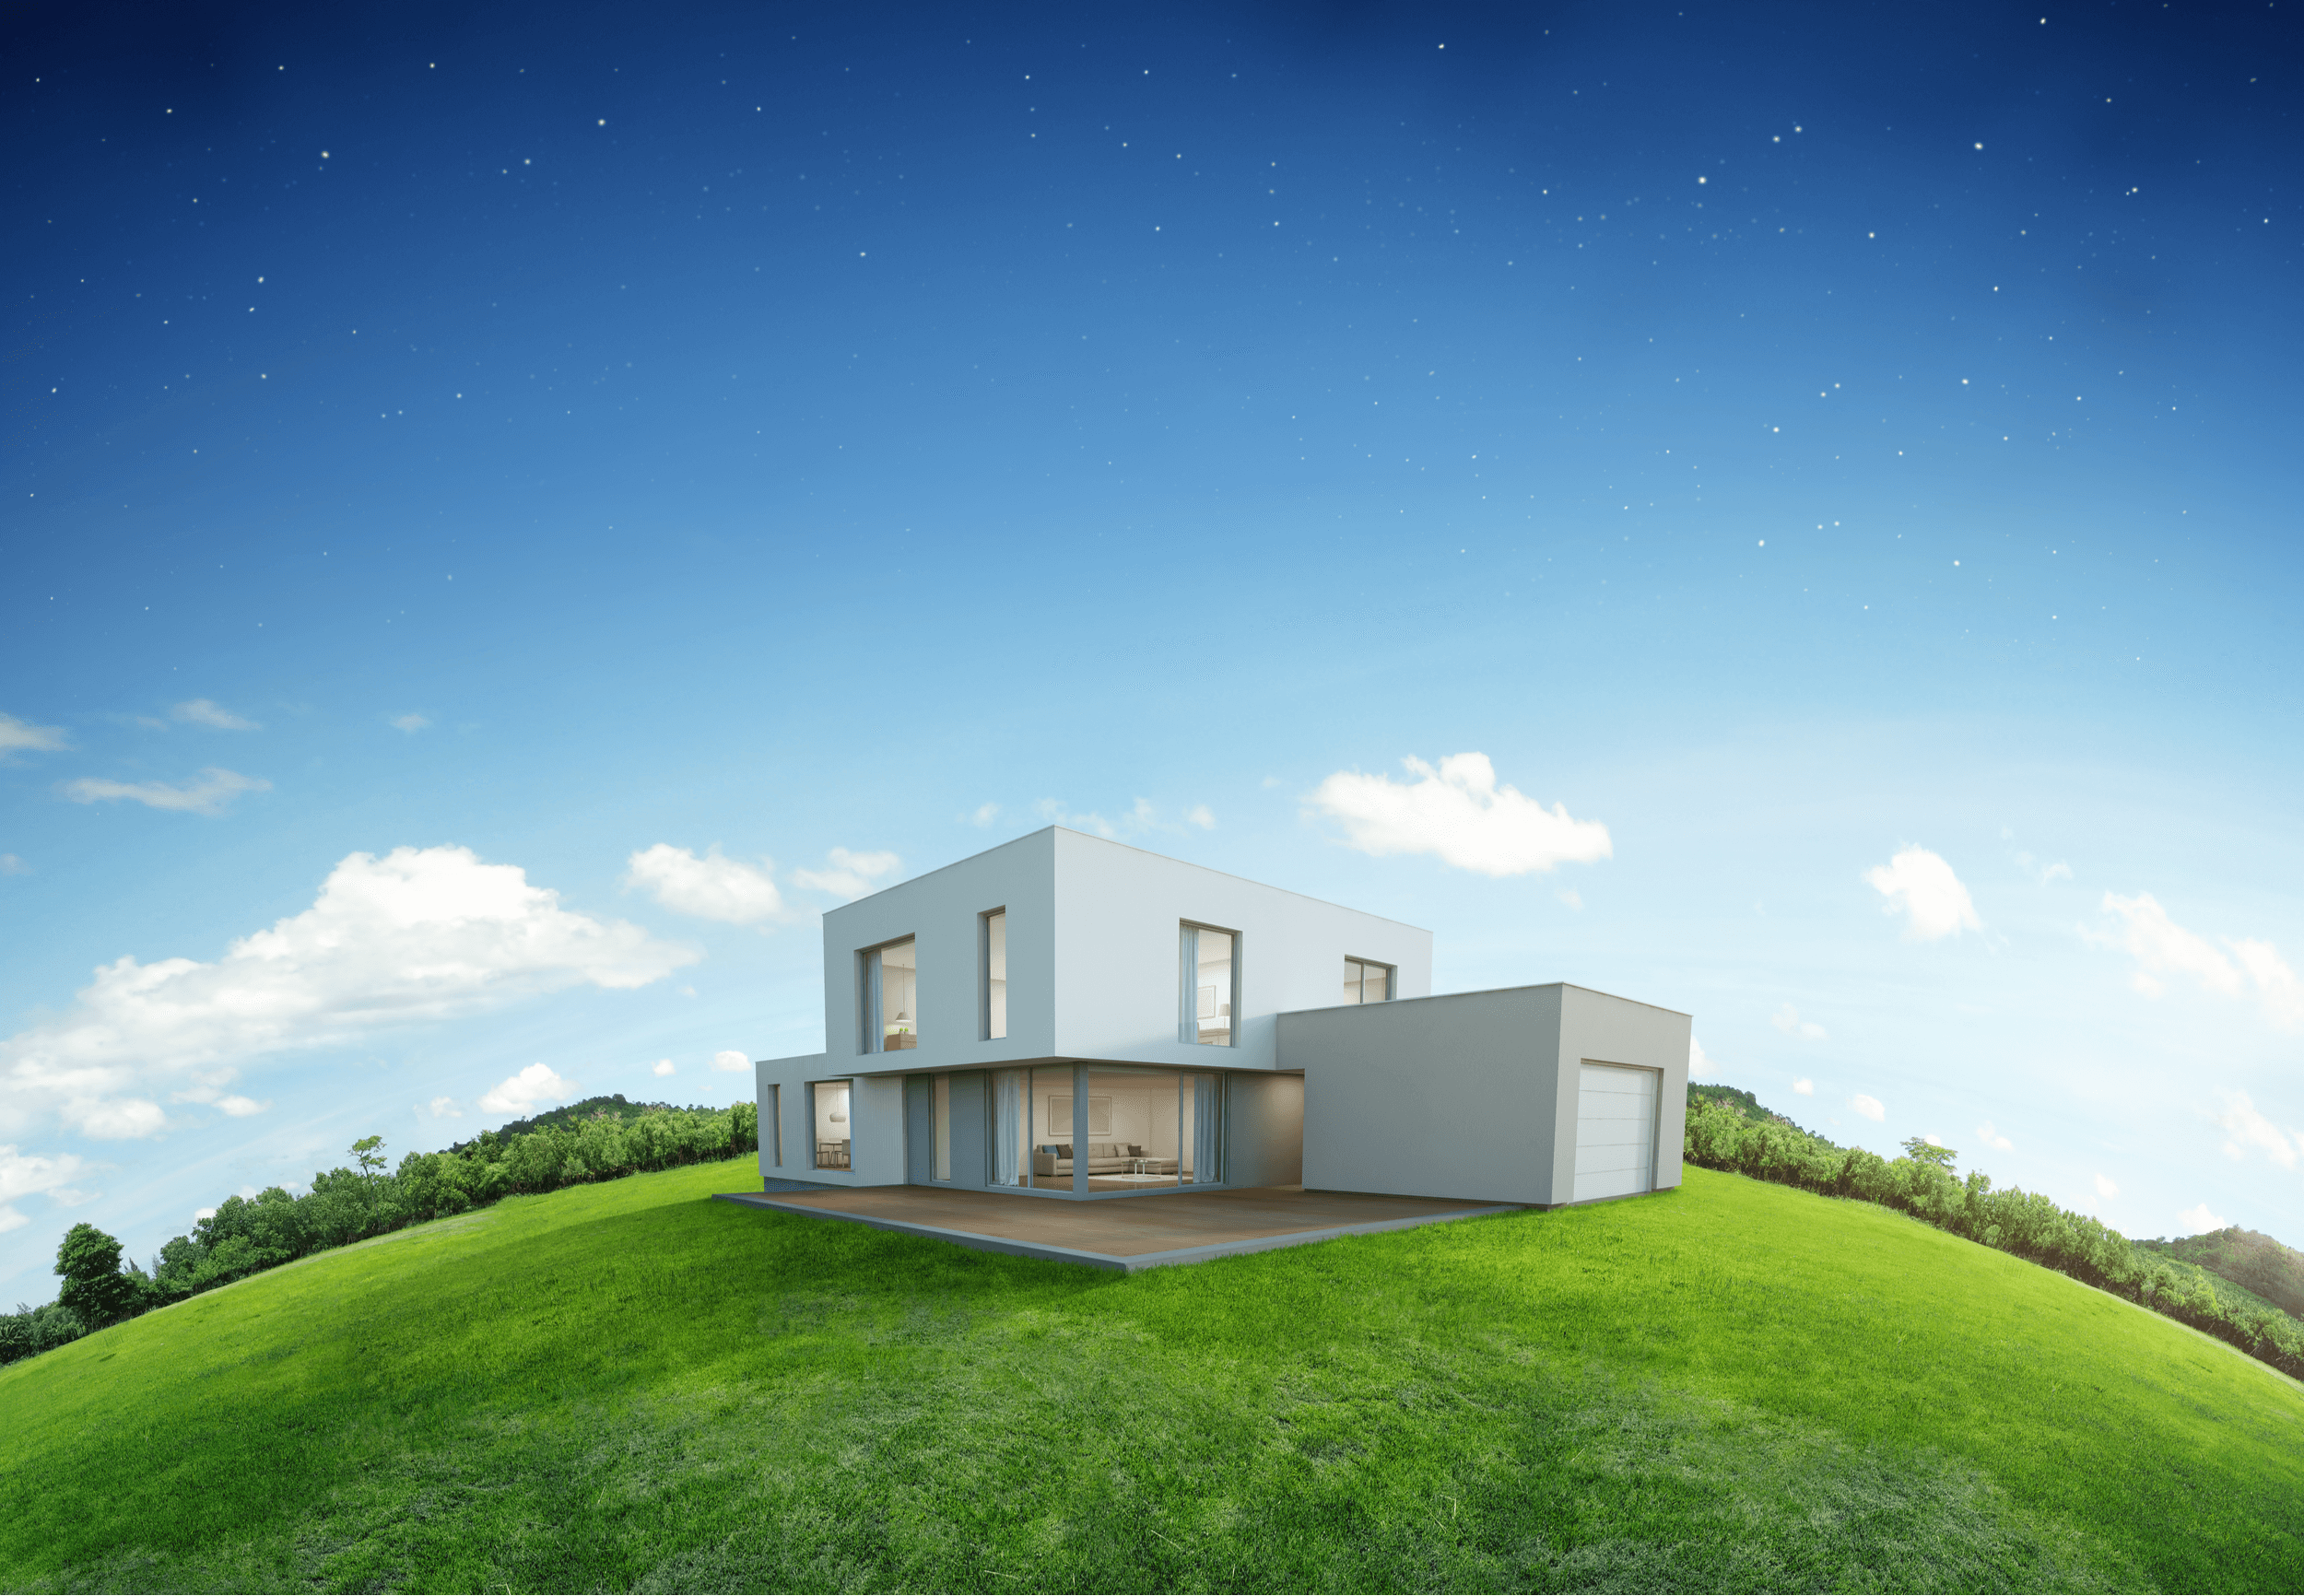 Modern house on earth and green grass with blue sky background in real estate sale or property investment concept, Buying new home for big family - 3d illustration of residential building exterior